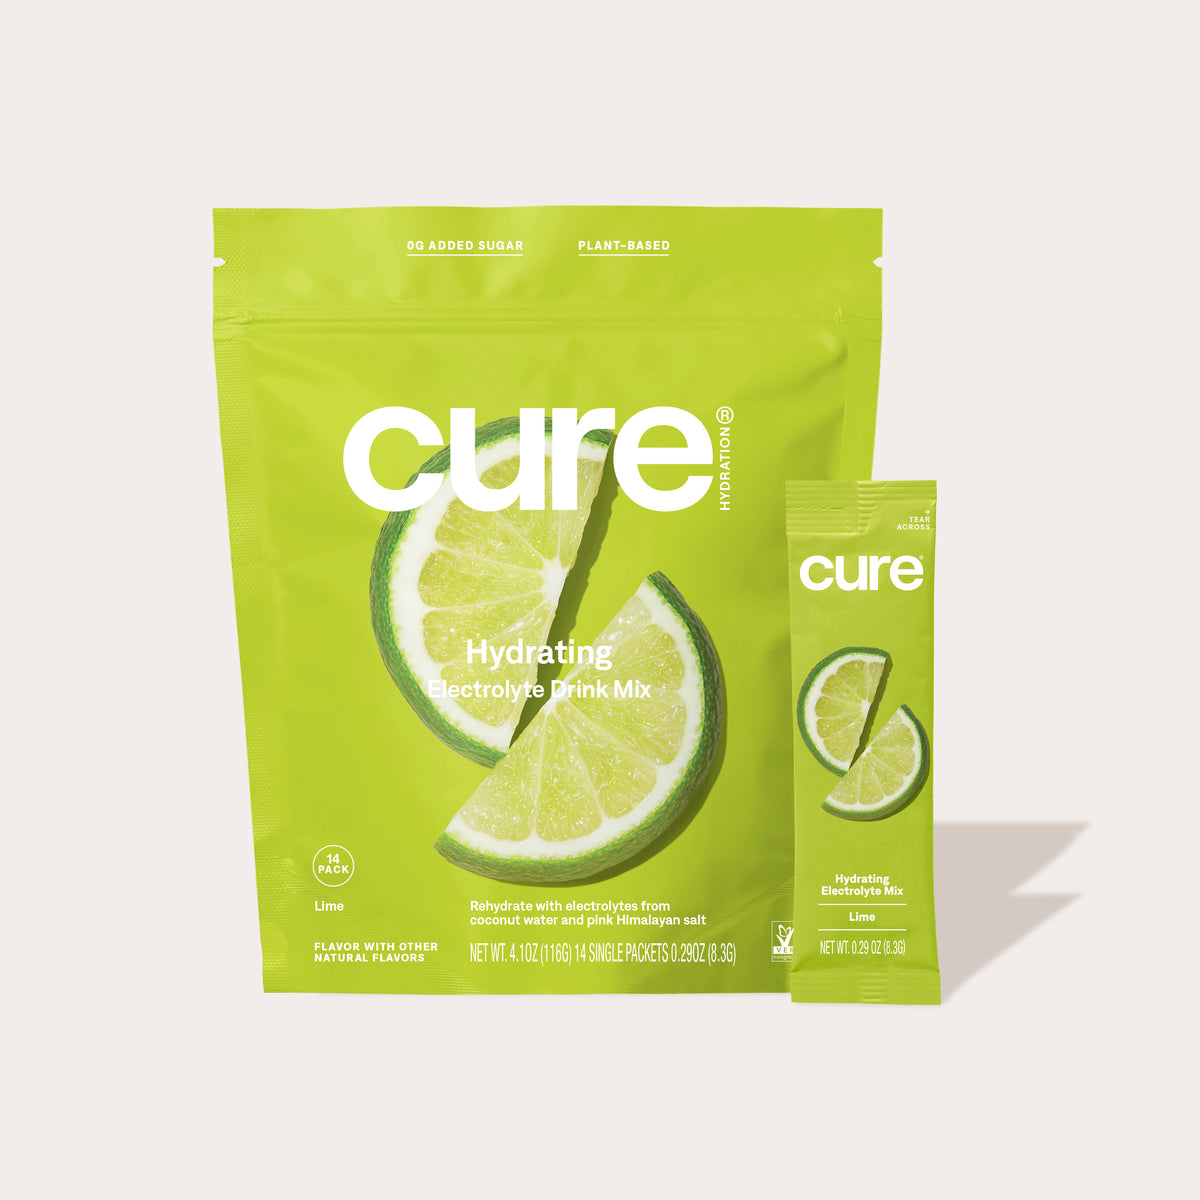 Lime hydrators from the specialist